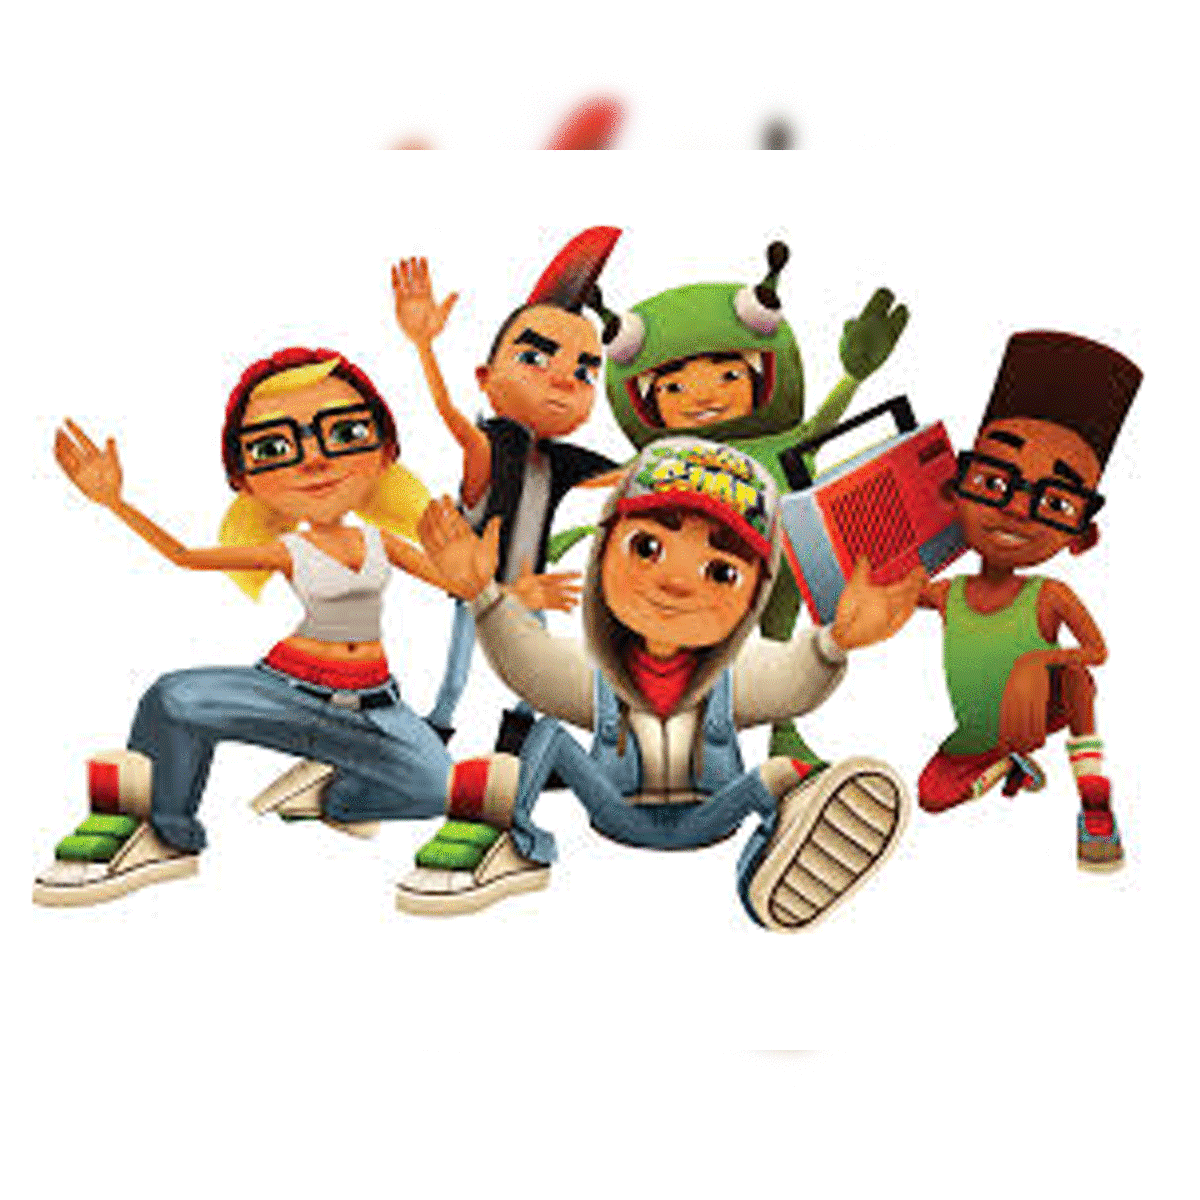 Subway Surfers is the first game to hit 1 billion downloads on the